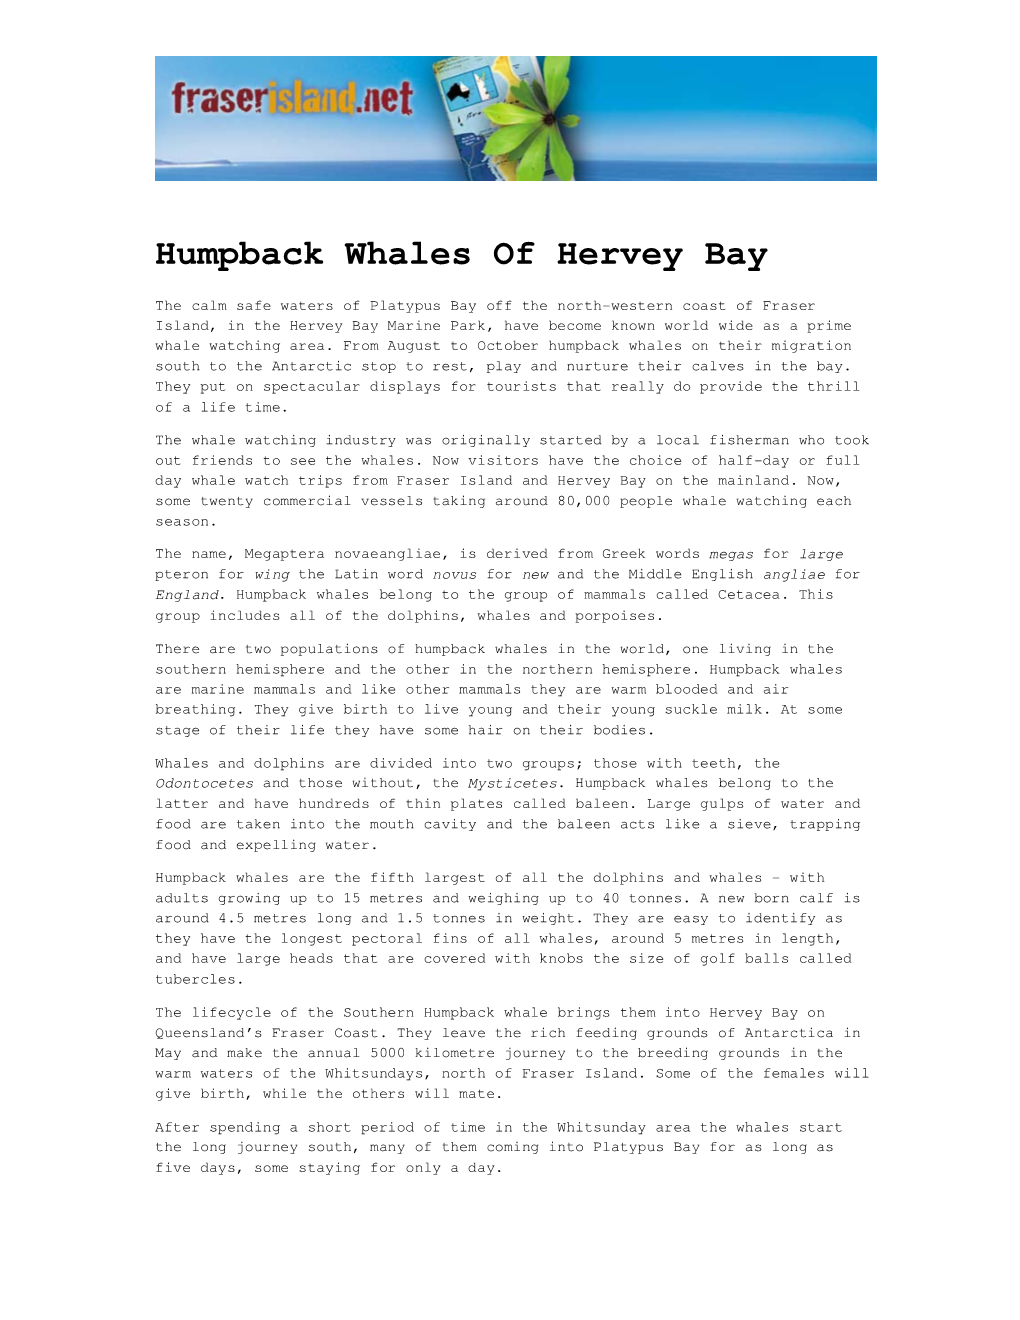 Humpback Whales of Hervey Bay